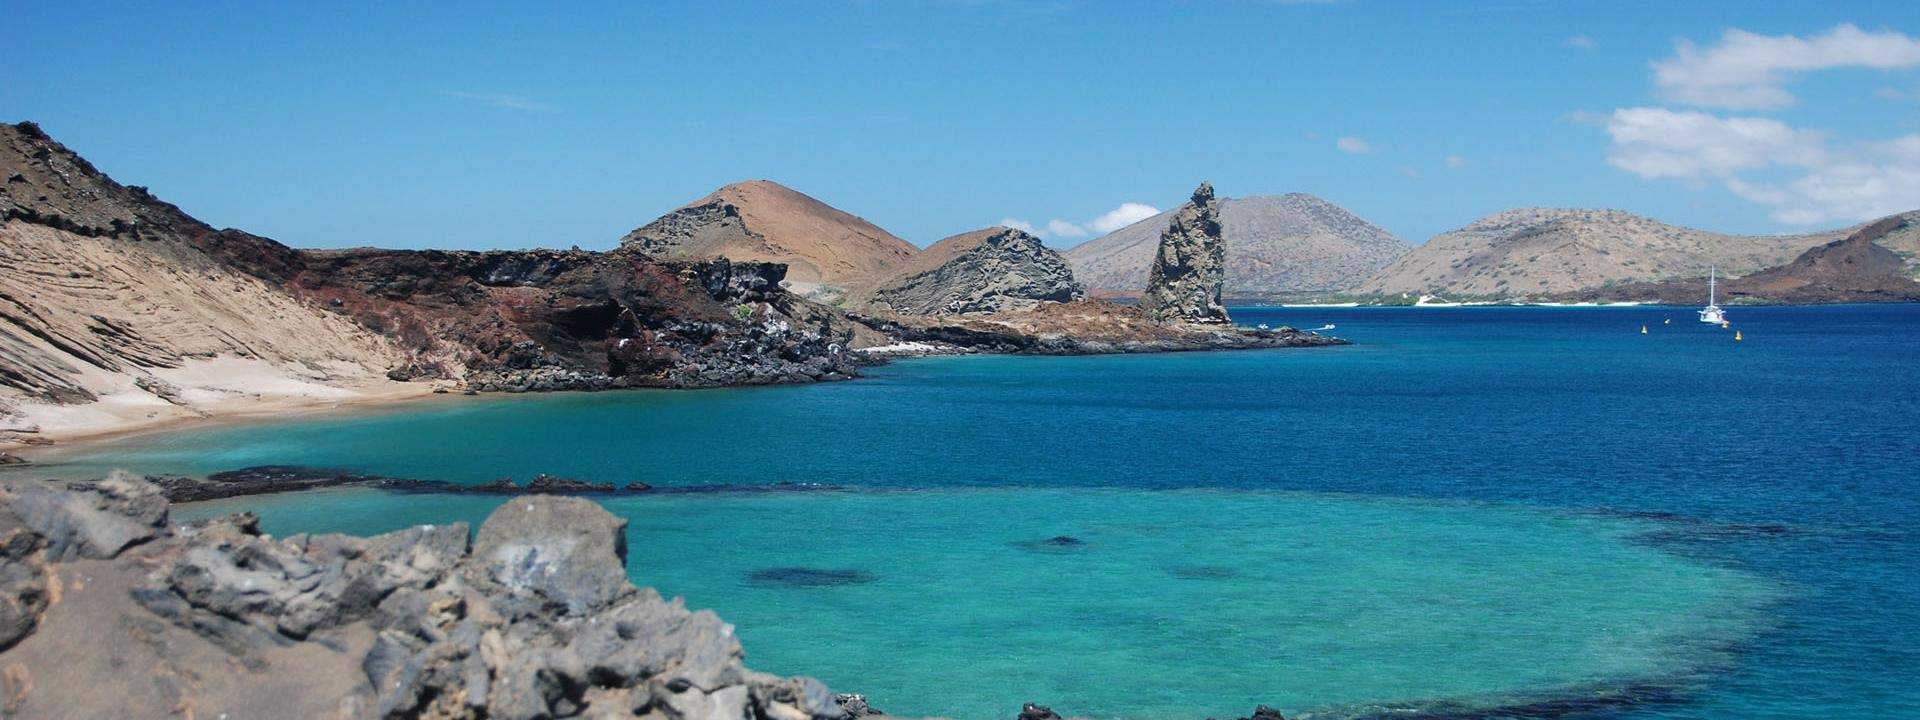 Sail along the Pacific Ocean and see the most beautiful islands of the Galapagos